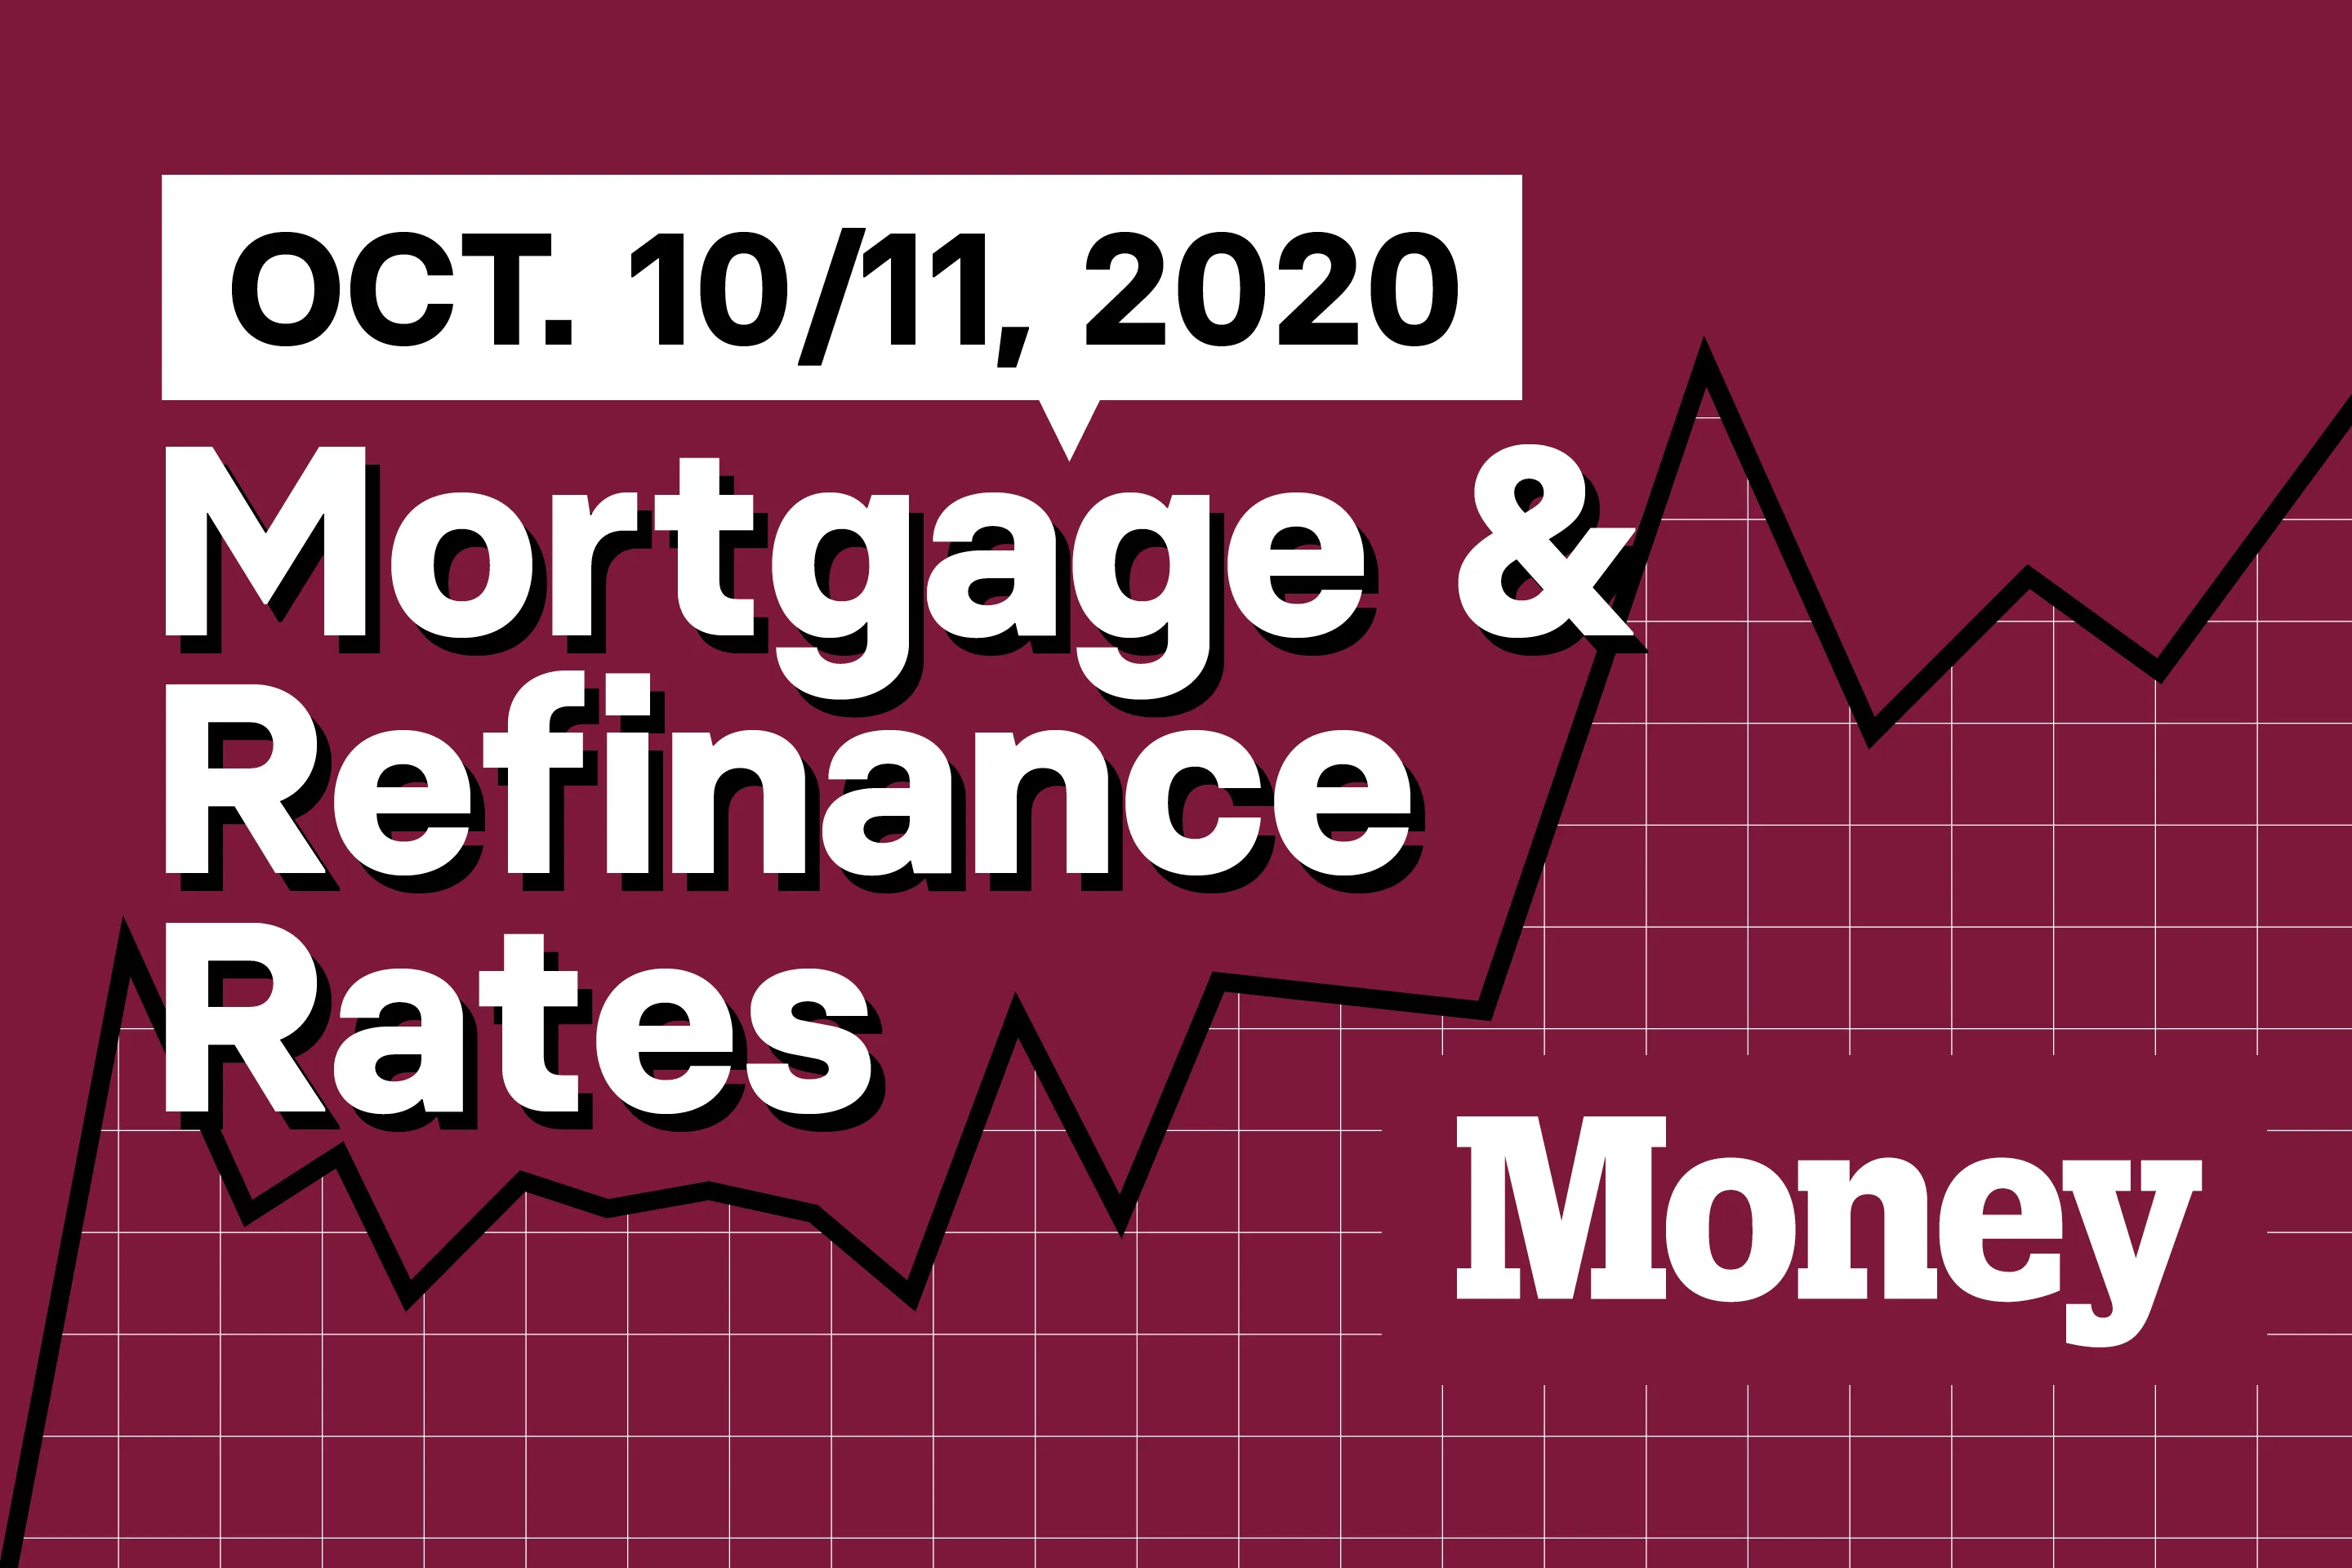 Today's Mortgage and Refinance Rates for October 10 and 11